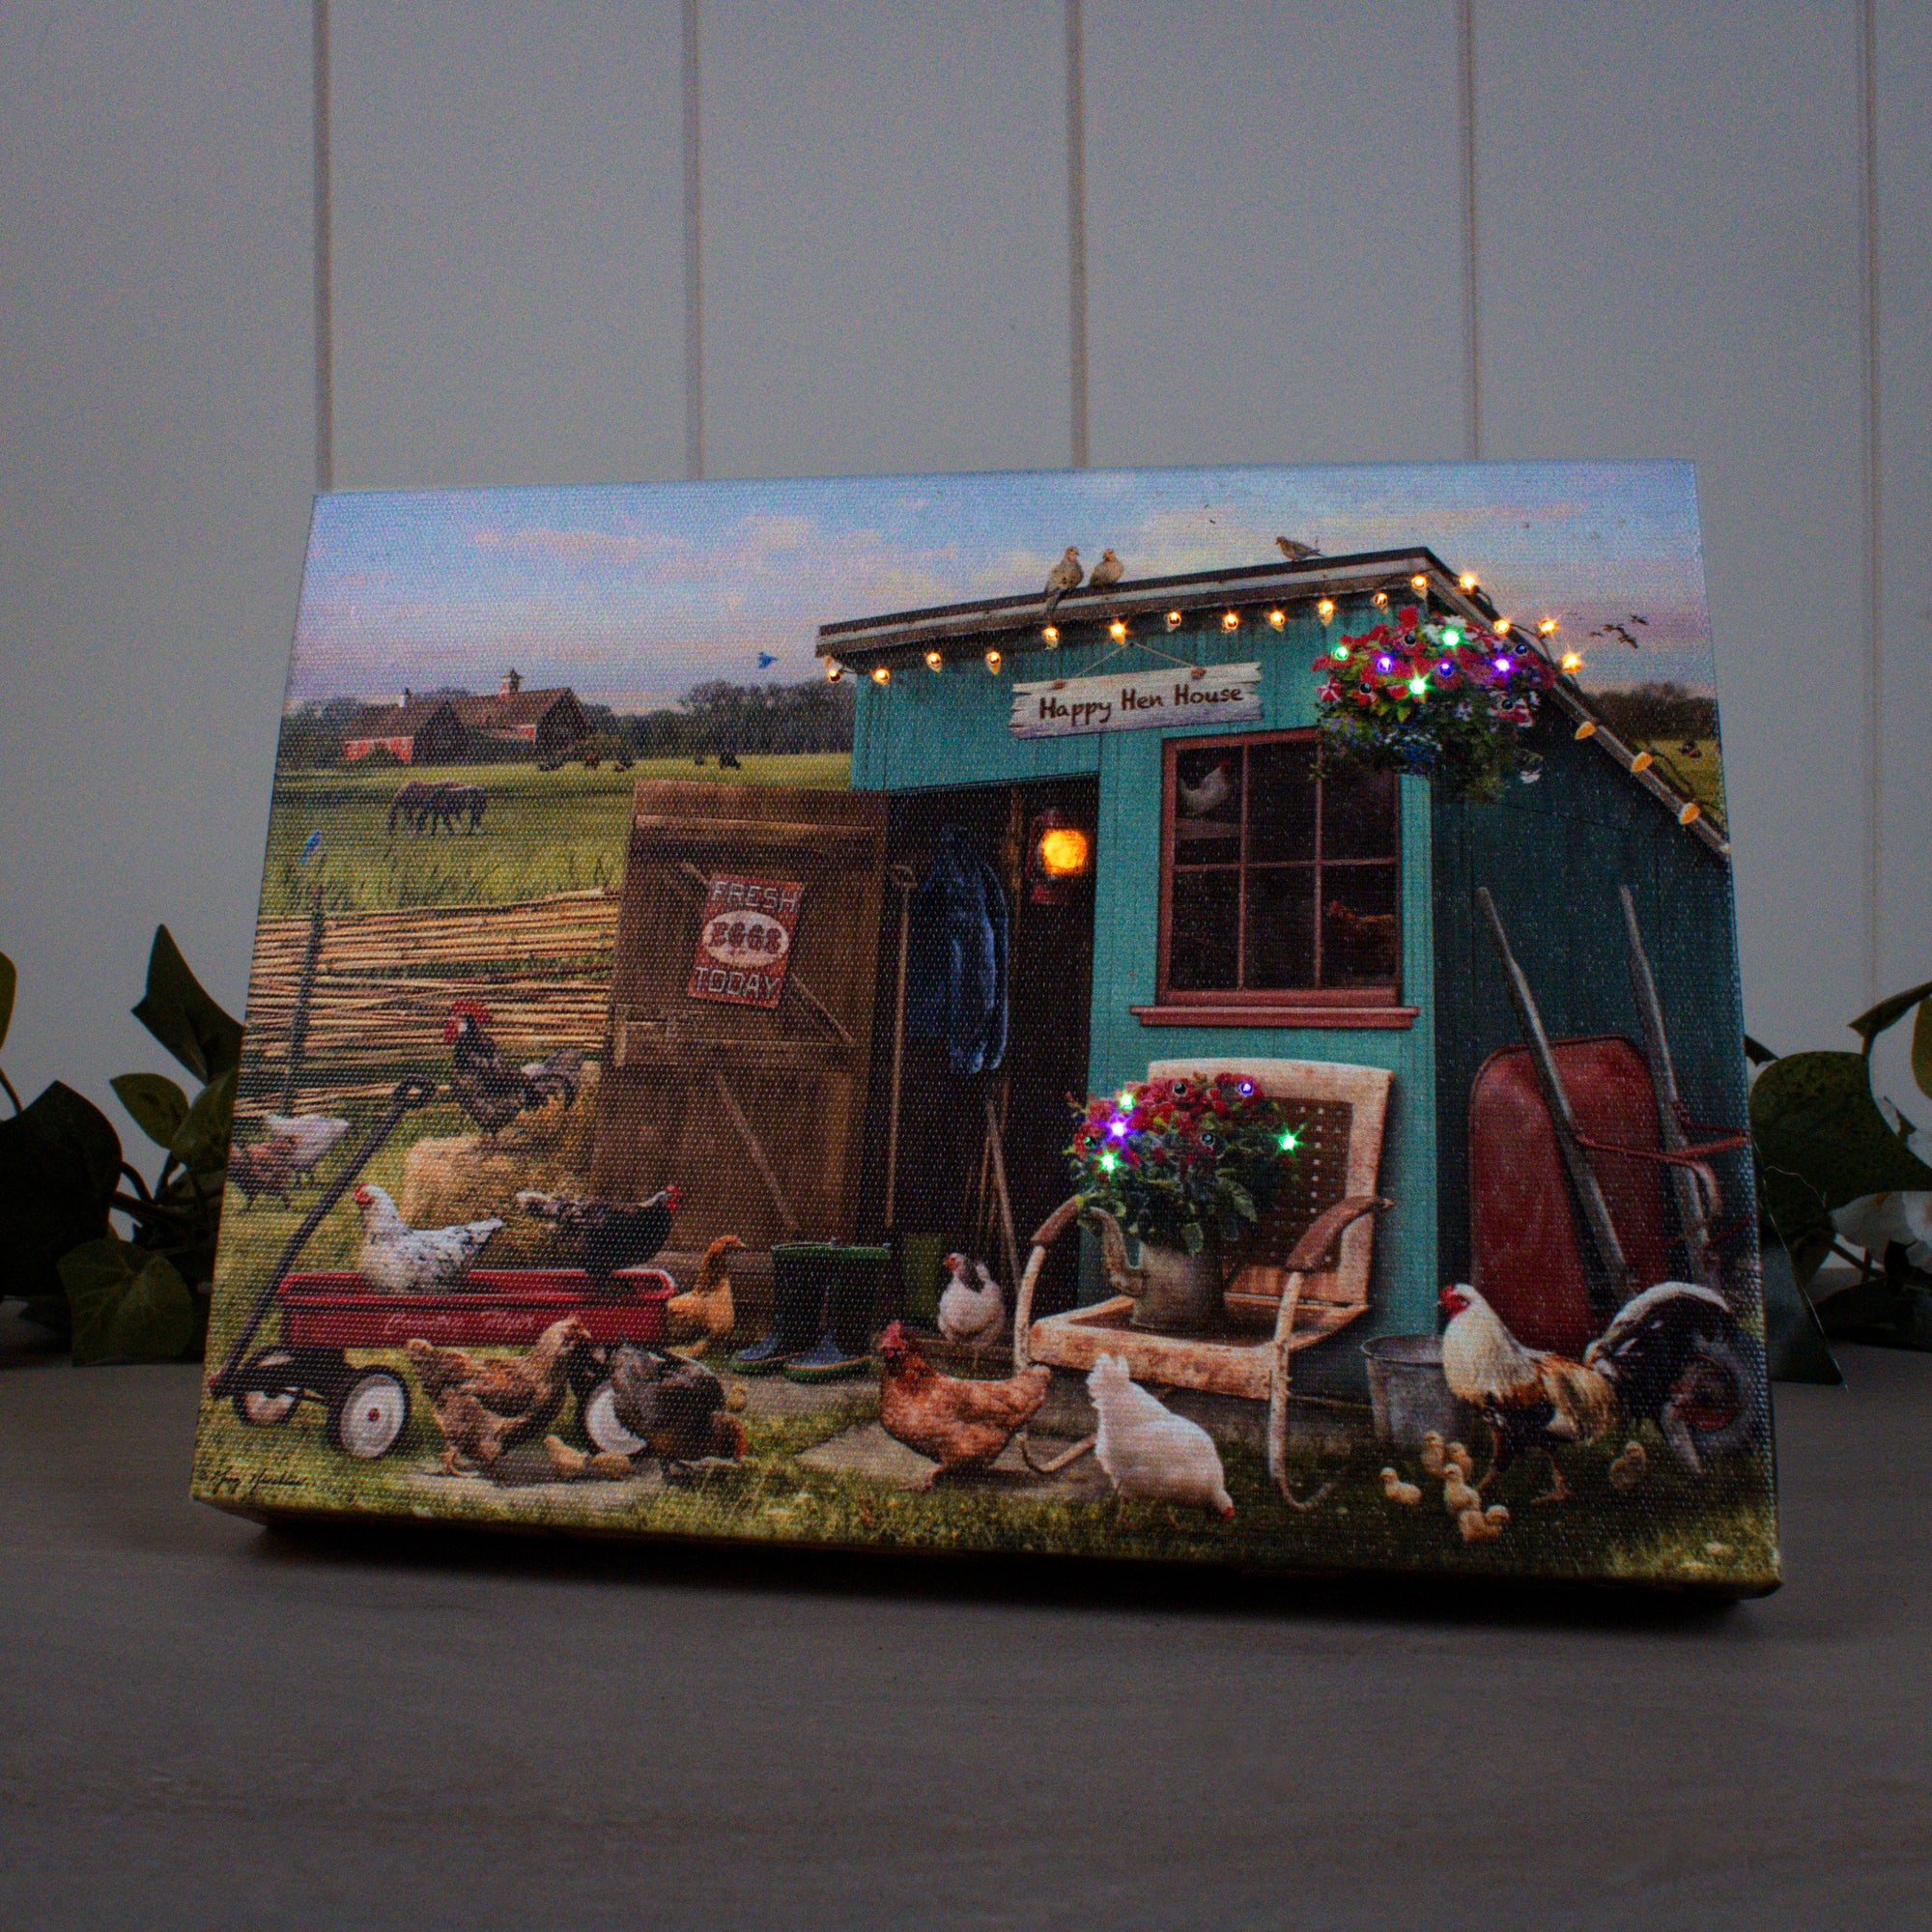 Happy Hen House 8x6 Lighted Tabletop Canvas